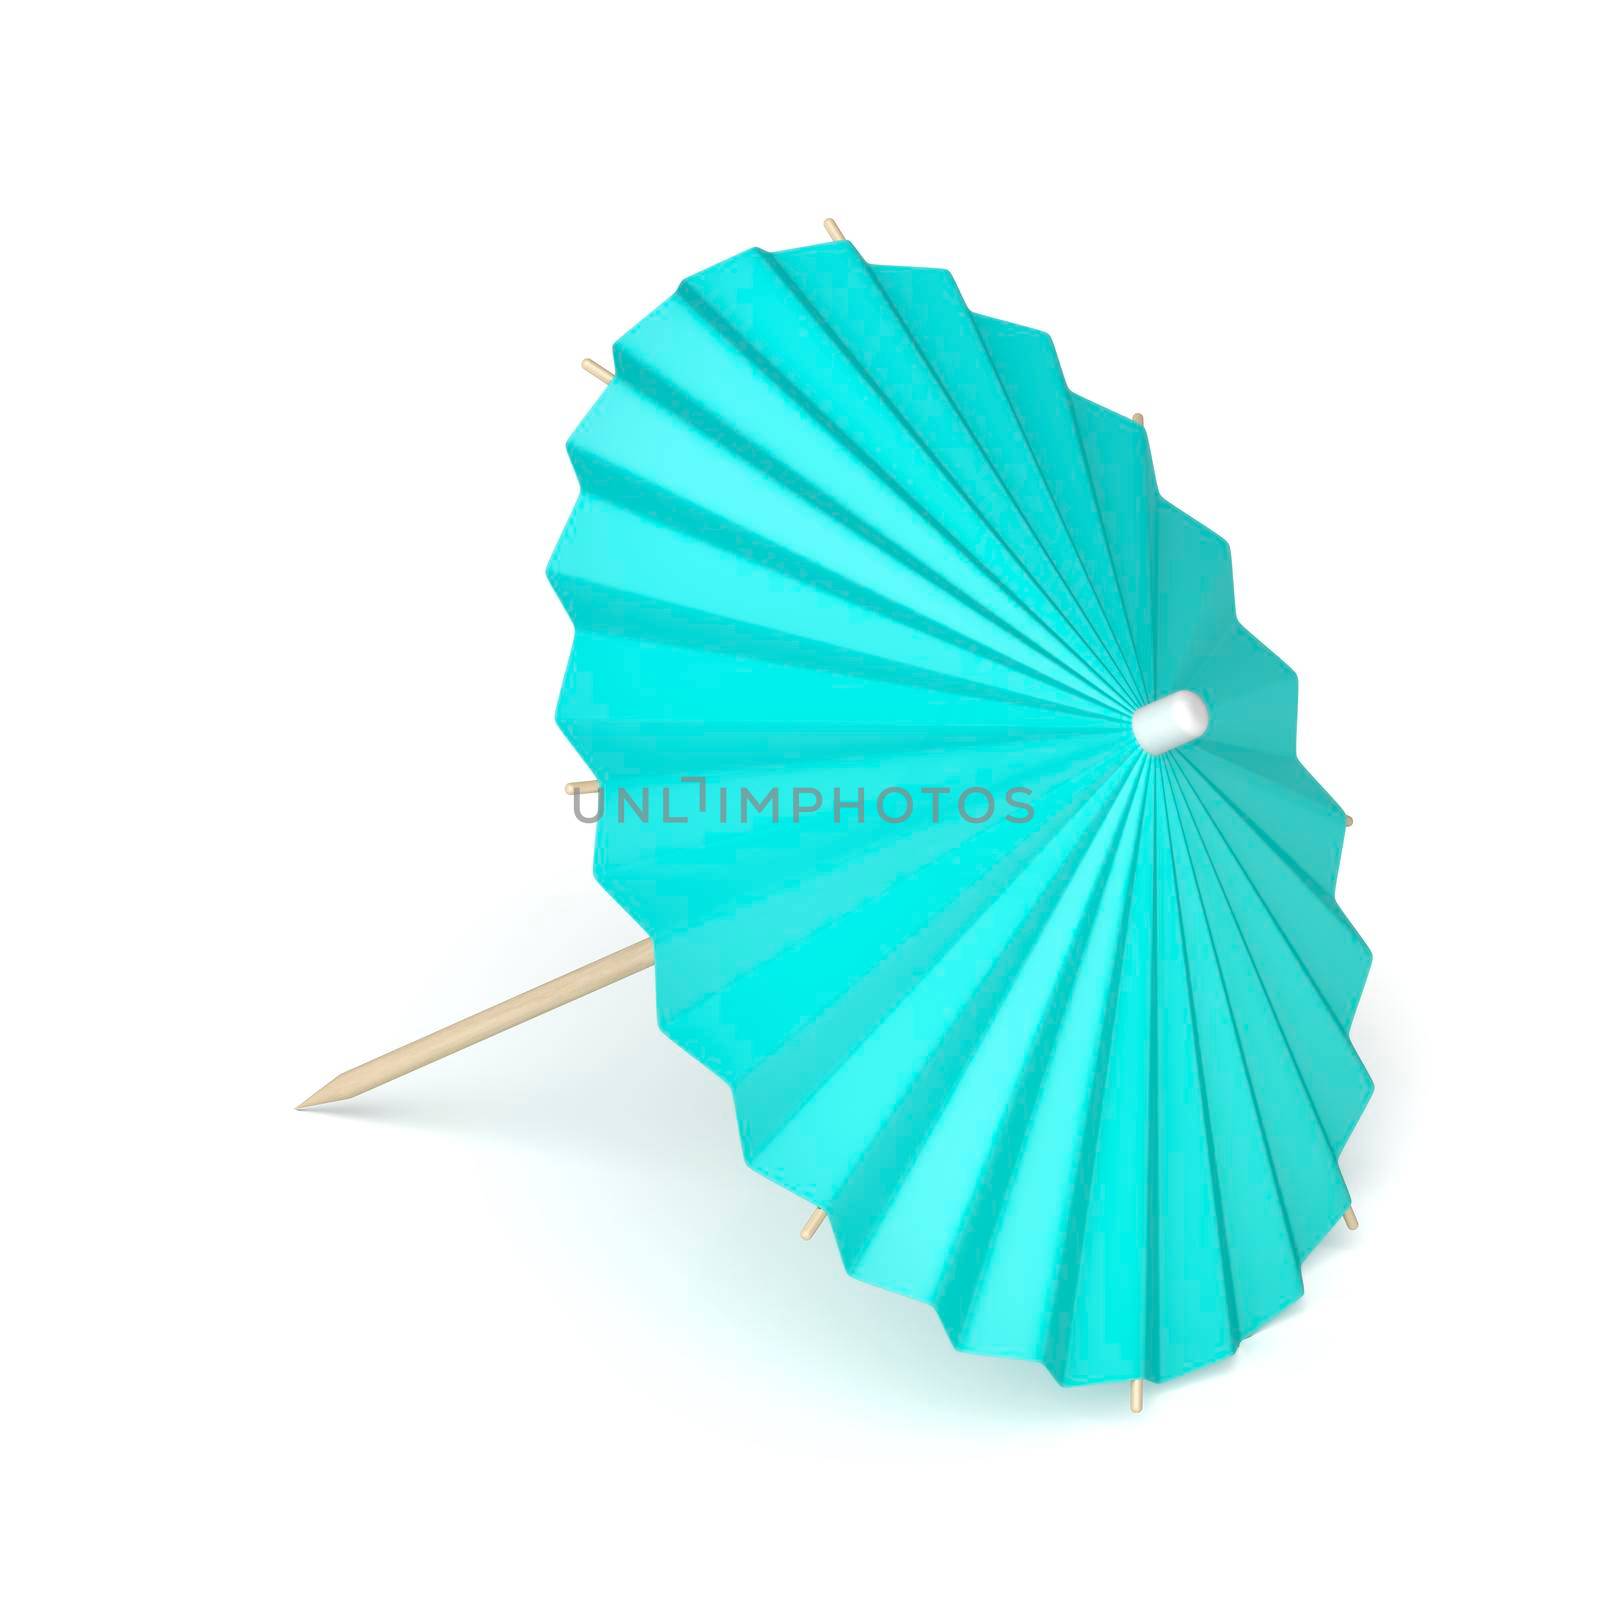 Decorative cocktail umbrella by magraphics